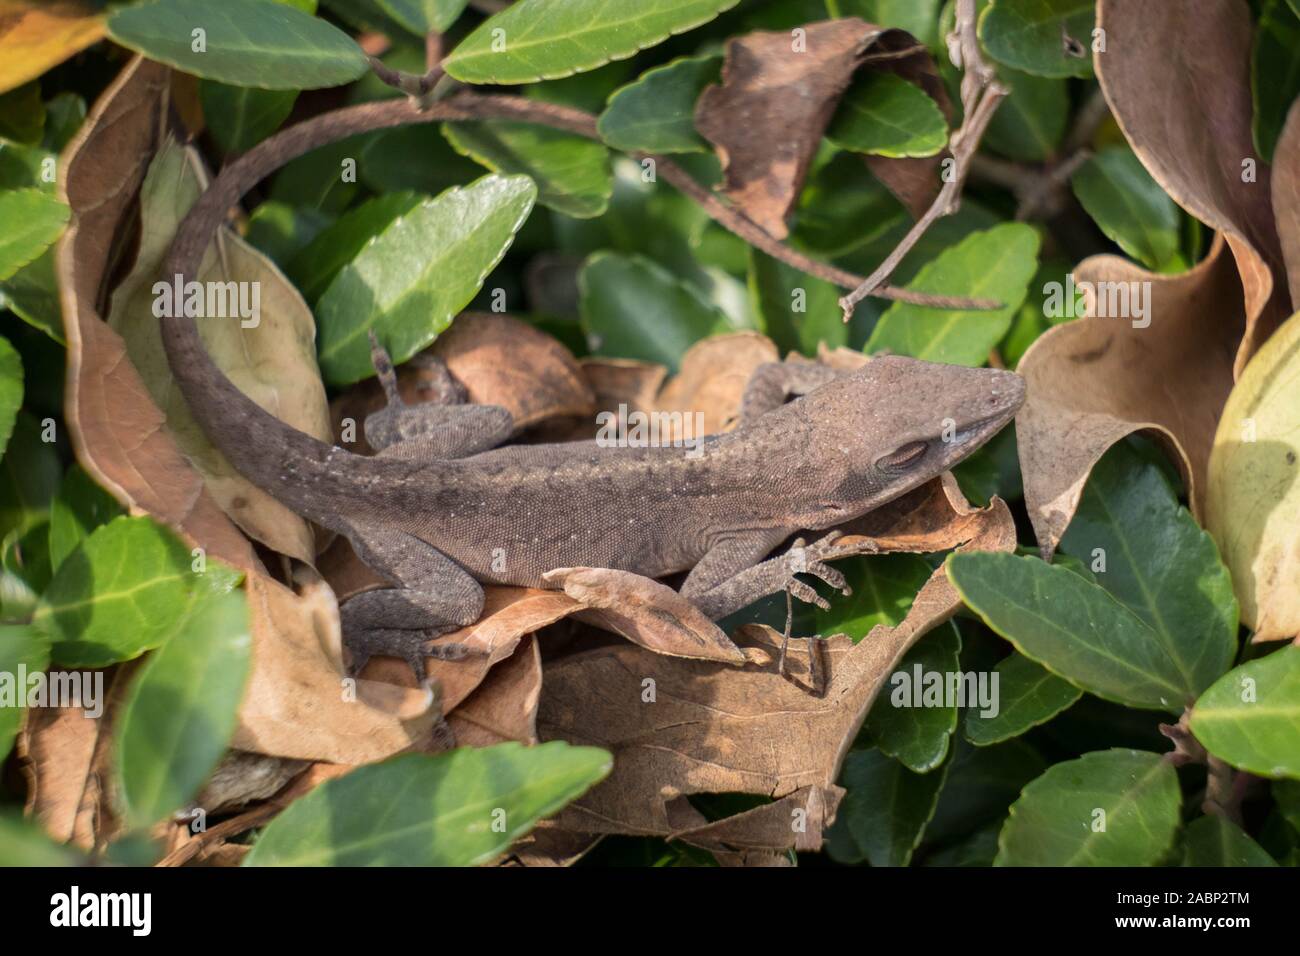 A Carolina Anole takes a nap on a bed of autumn leaves. Yates Mill County Park, Raleigh, North Carolina. Stock Photo